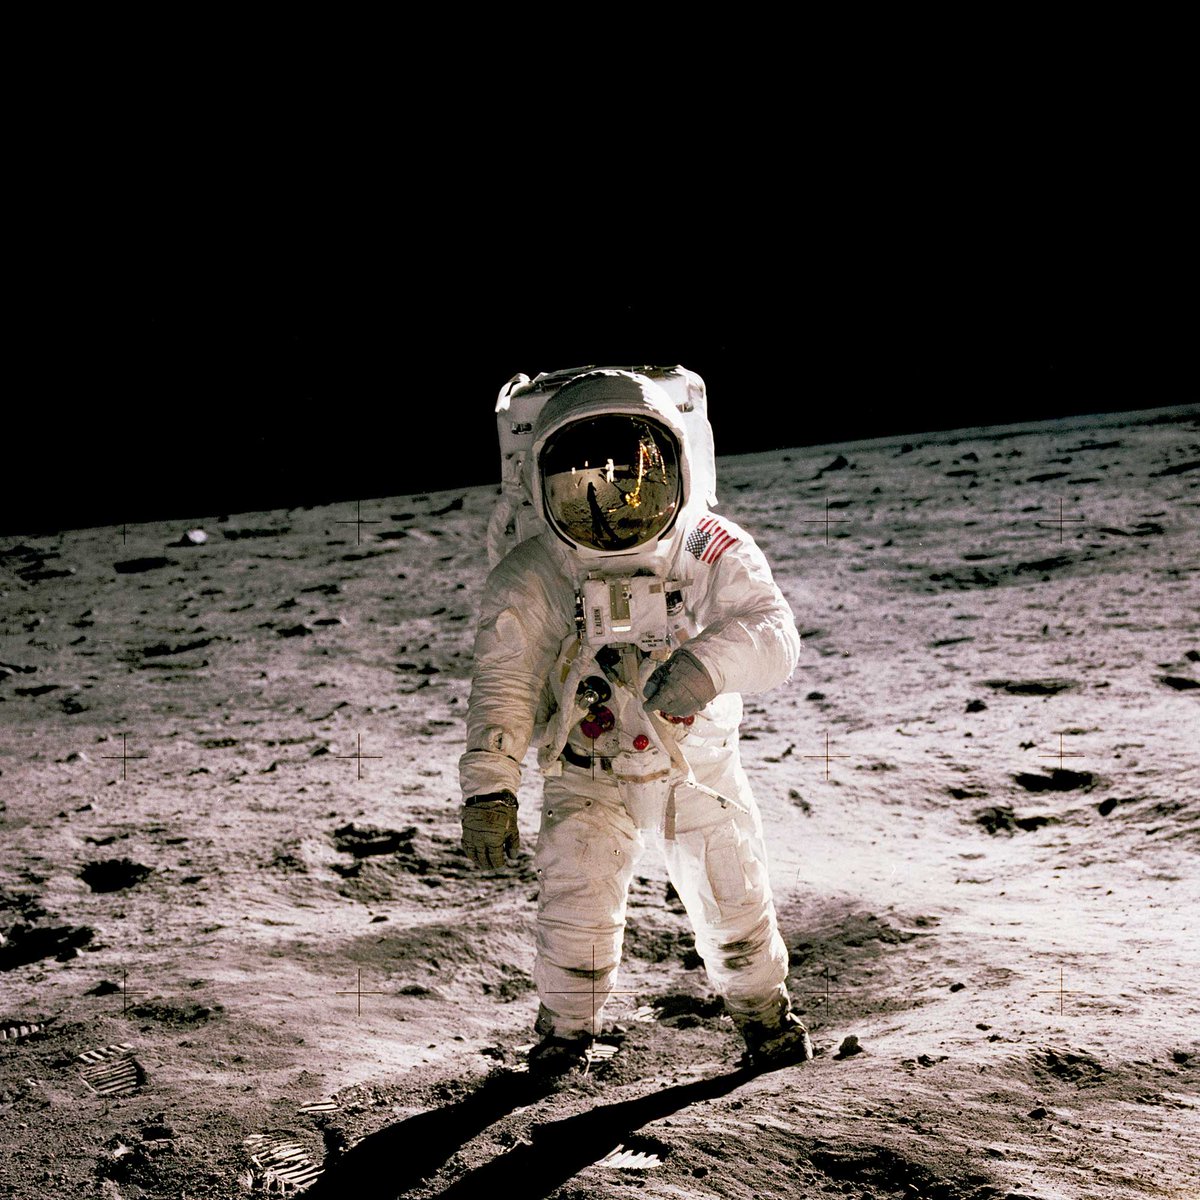 Bidding for the Apollo Celebration Gala Silent Auction opens online in June. The auction will feature incredible works of art by Apollo 11 Astronaut General Michael Collins & art from NASA Astronaut Nicole Stott.|  goo.gl/3zLa5D.